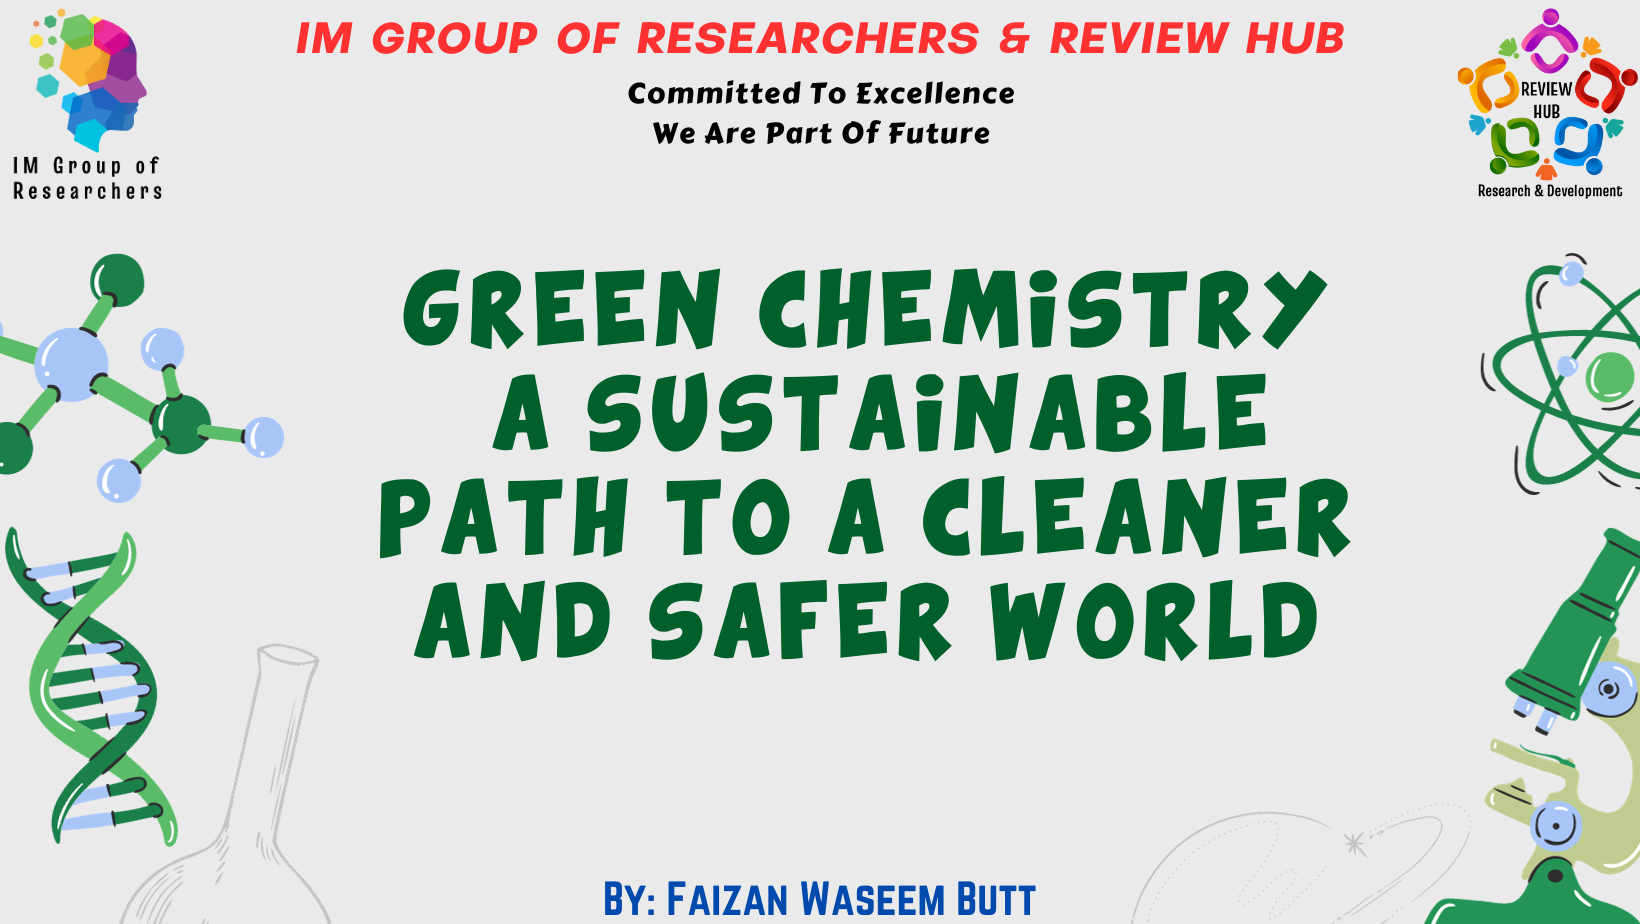 Green Chemistry: A Sustainable Path to a Cleaner and Safer World